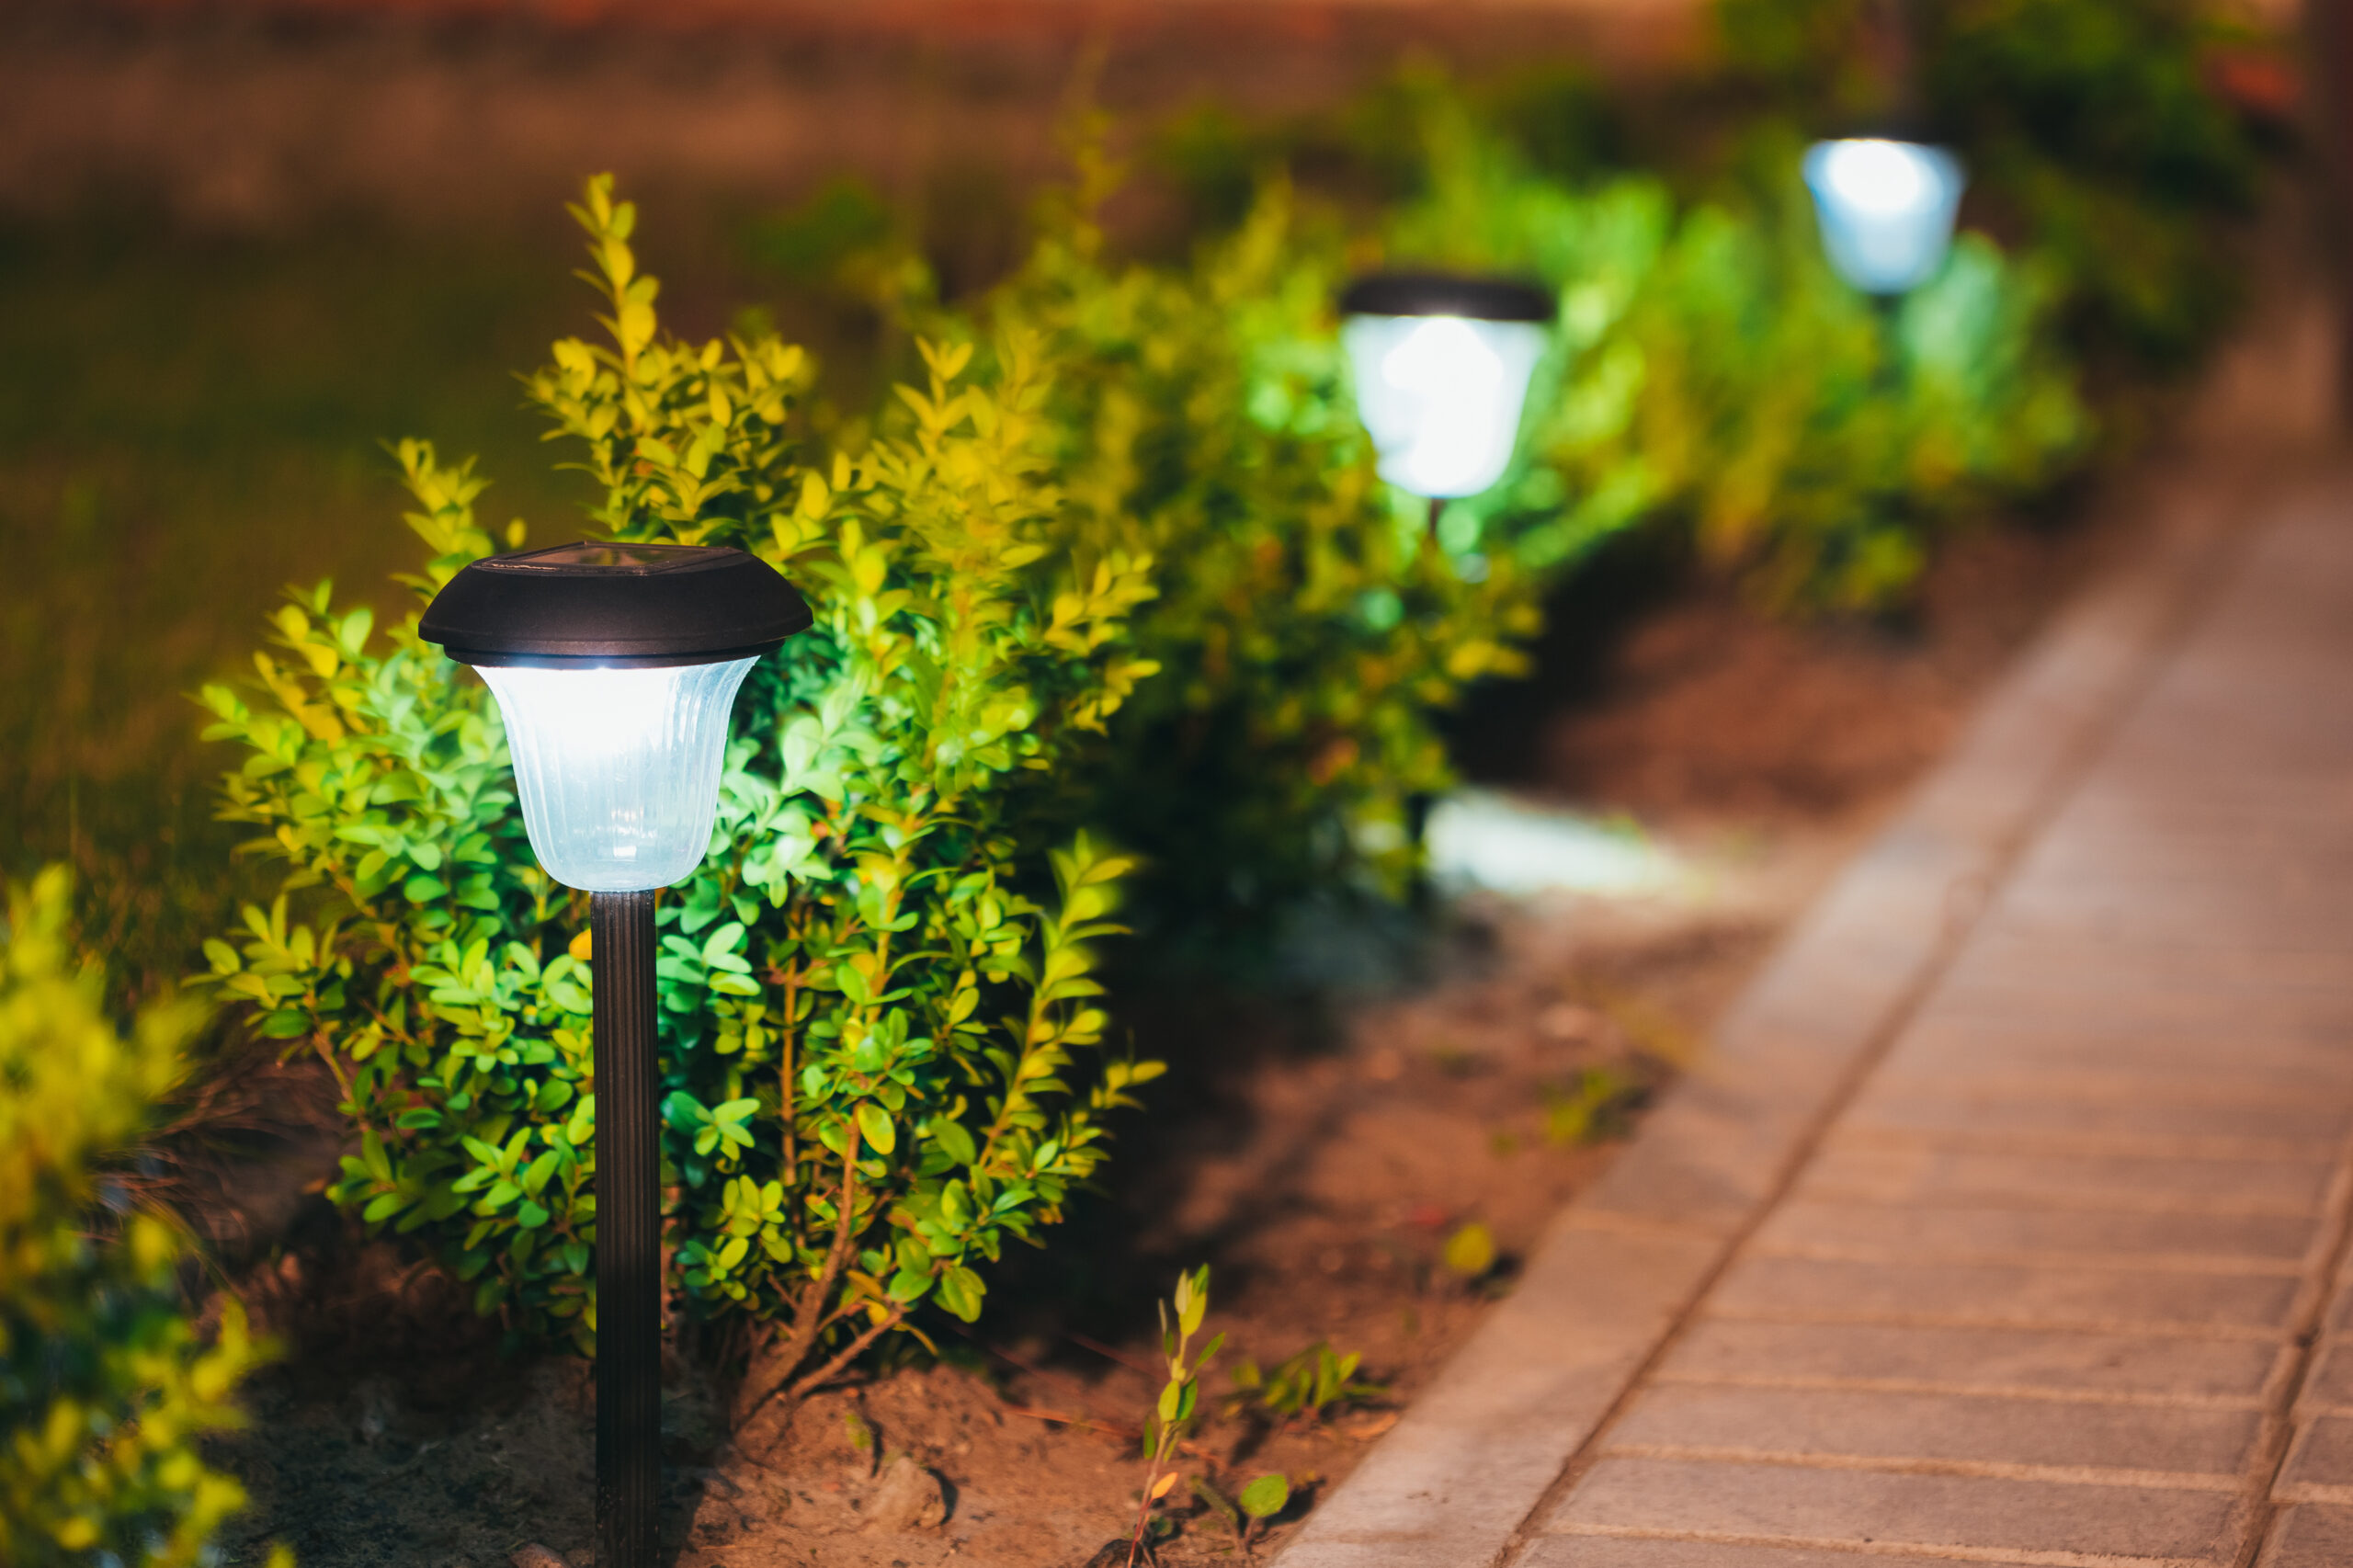 Should you install solar landscape lighting in Chesterton, IN